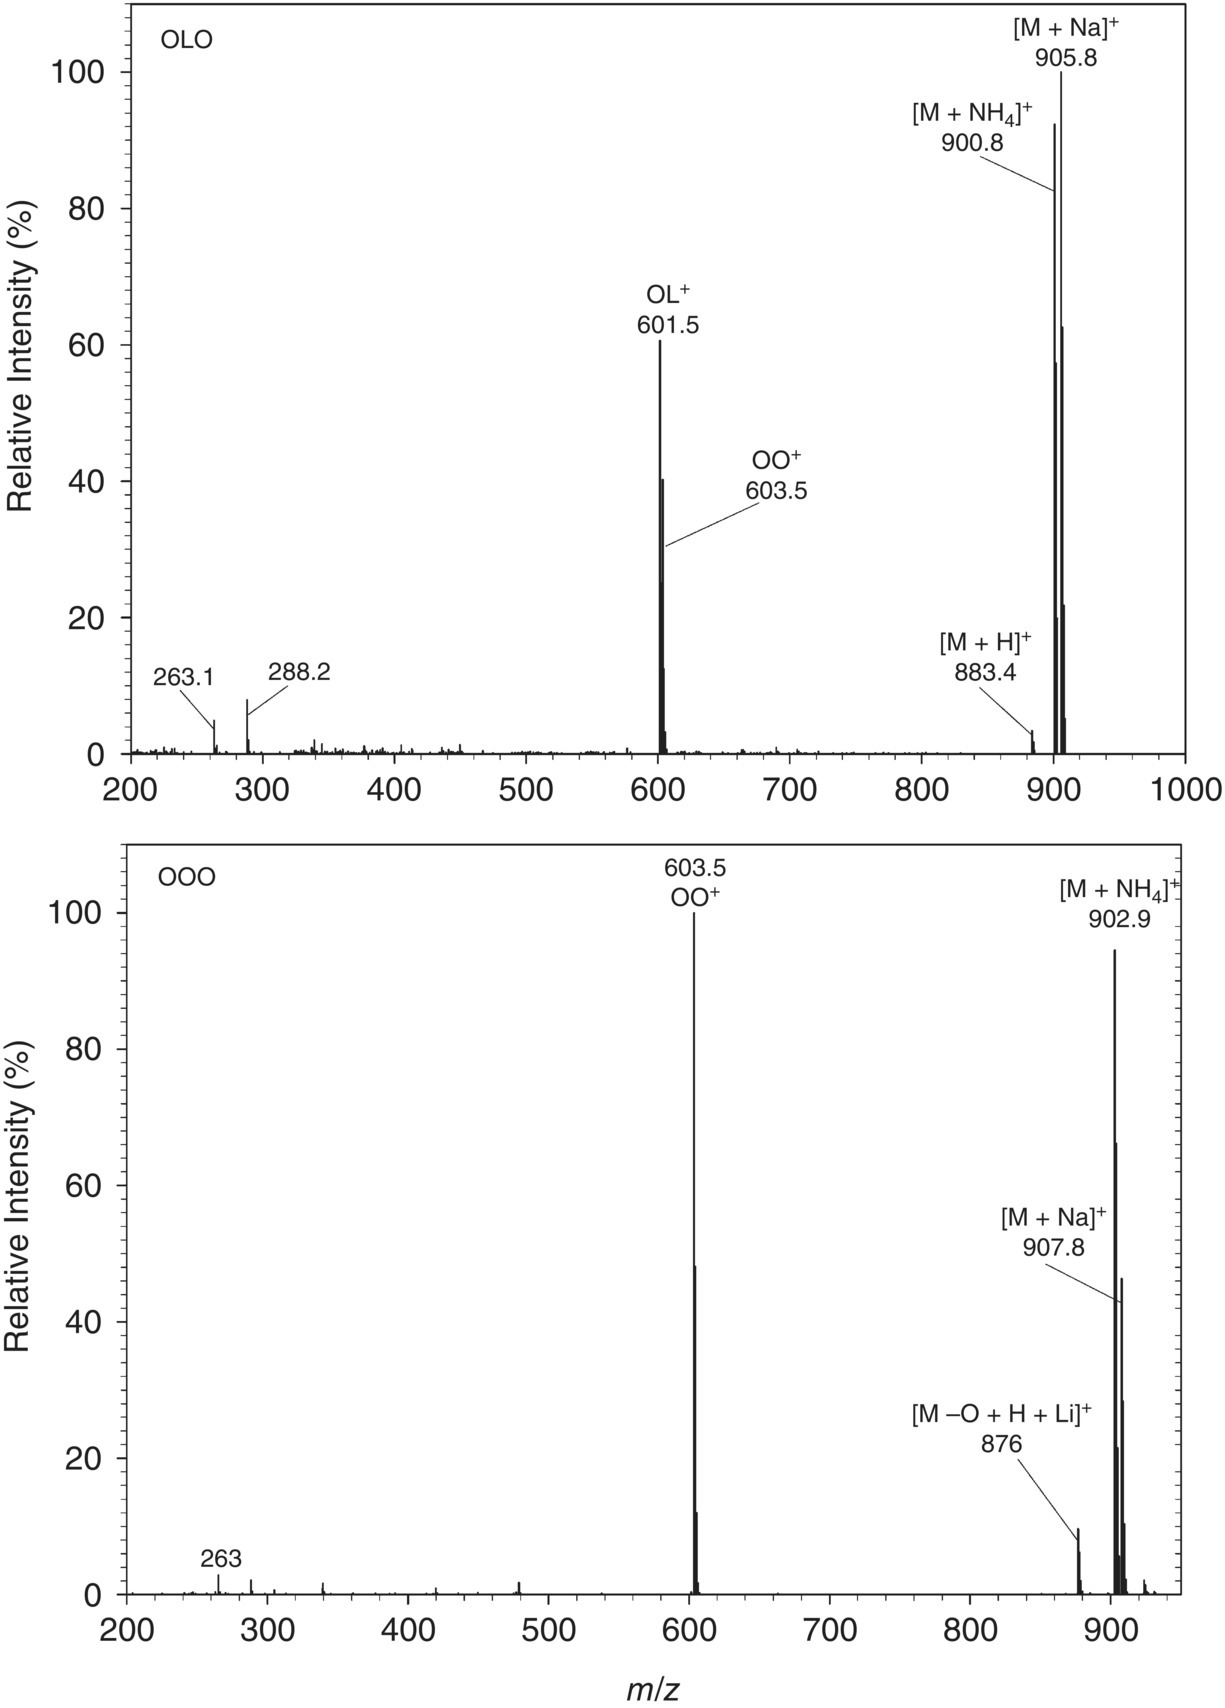 2 Graphs of the representative electrospray ionization mass spectrometry spectra of triacylglycerols (TAGs), OLO (left) and OOO (right), with peaks labeled 263.1, 288.2, OL+ 601.5, OO+603.5, 900.8, 263, etc.